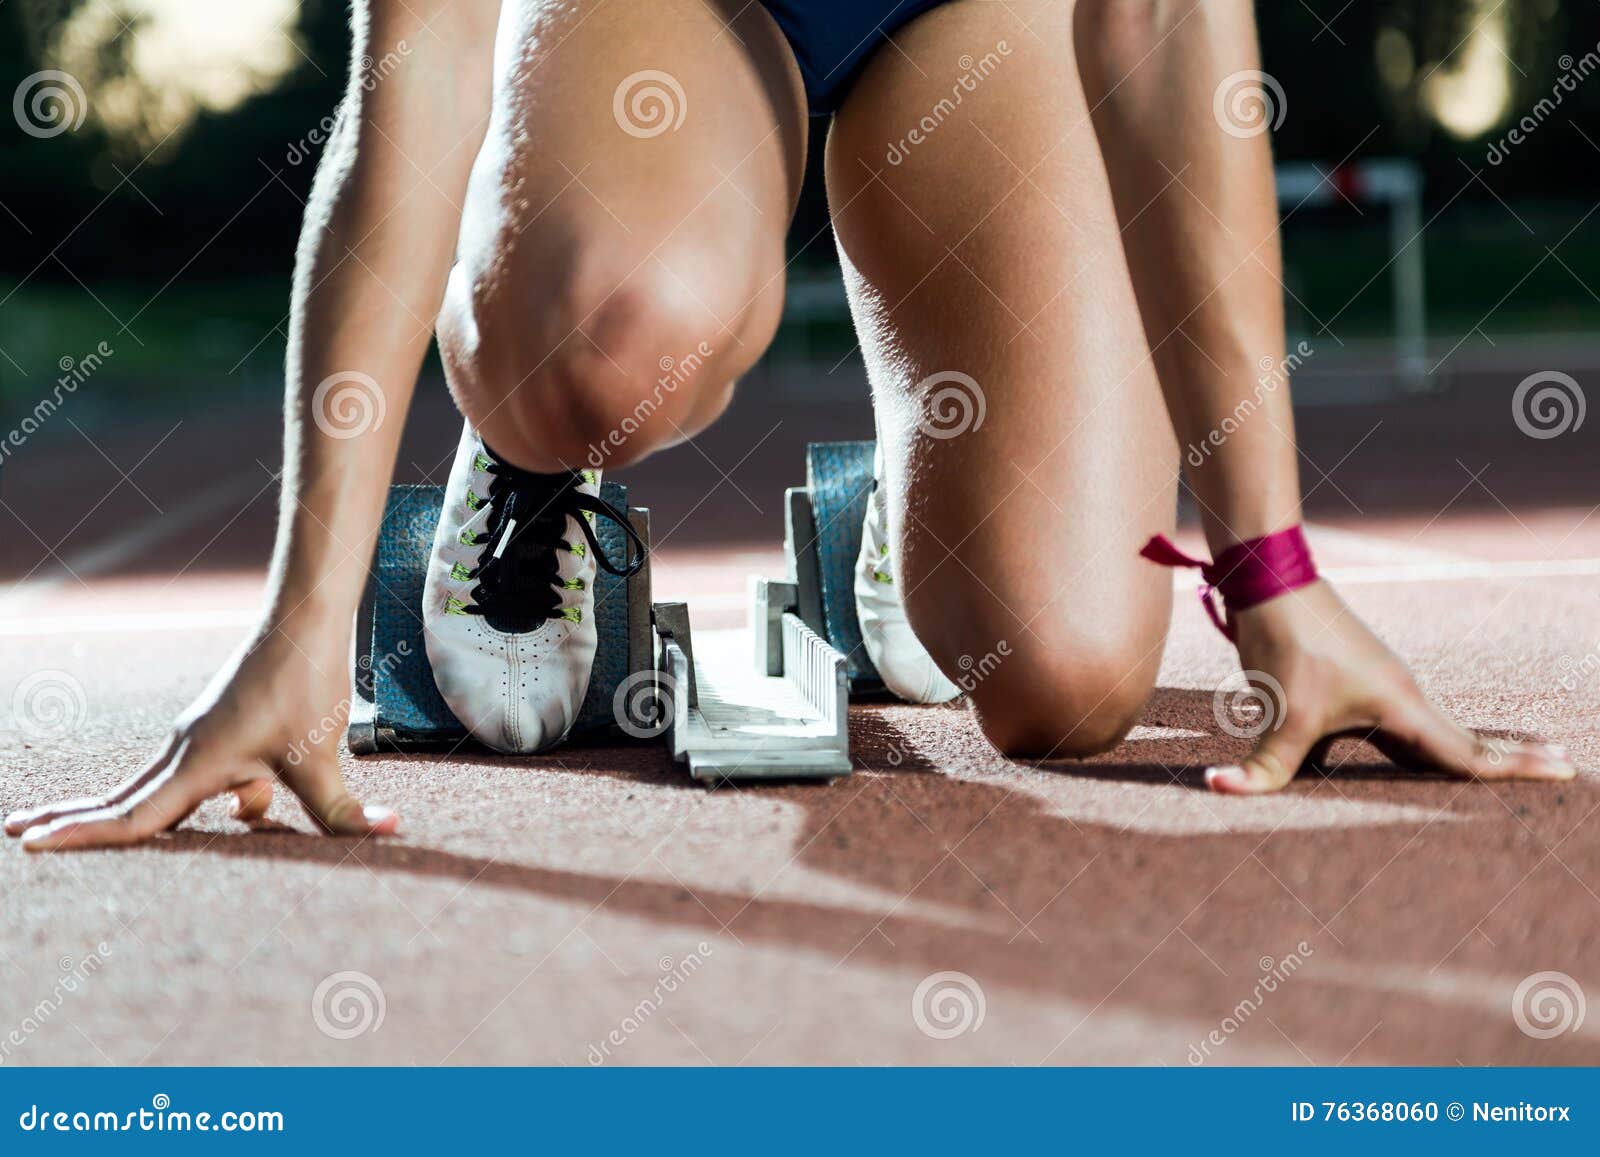 young female athlete launching off the start line in a race.